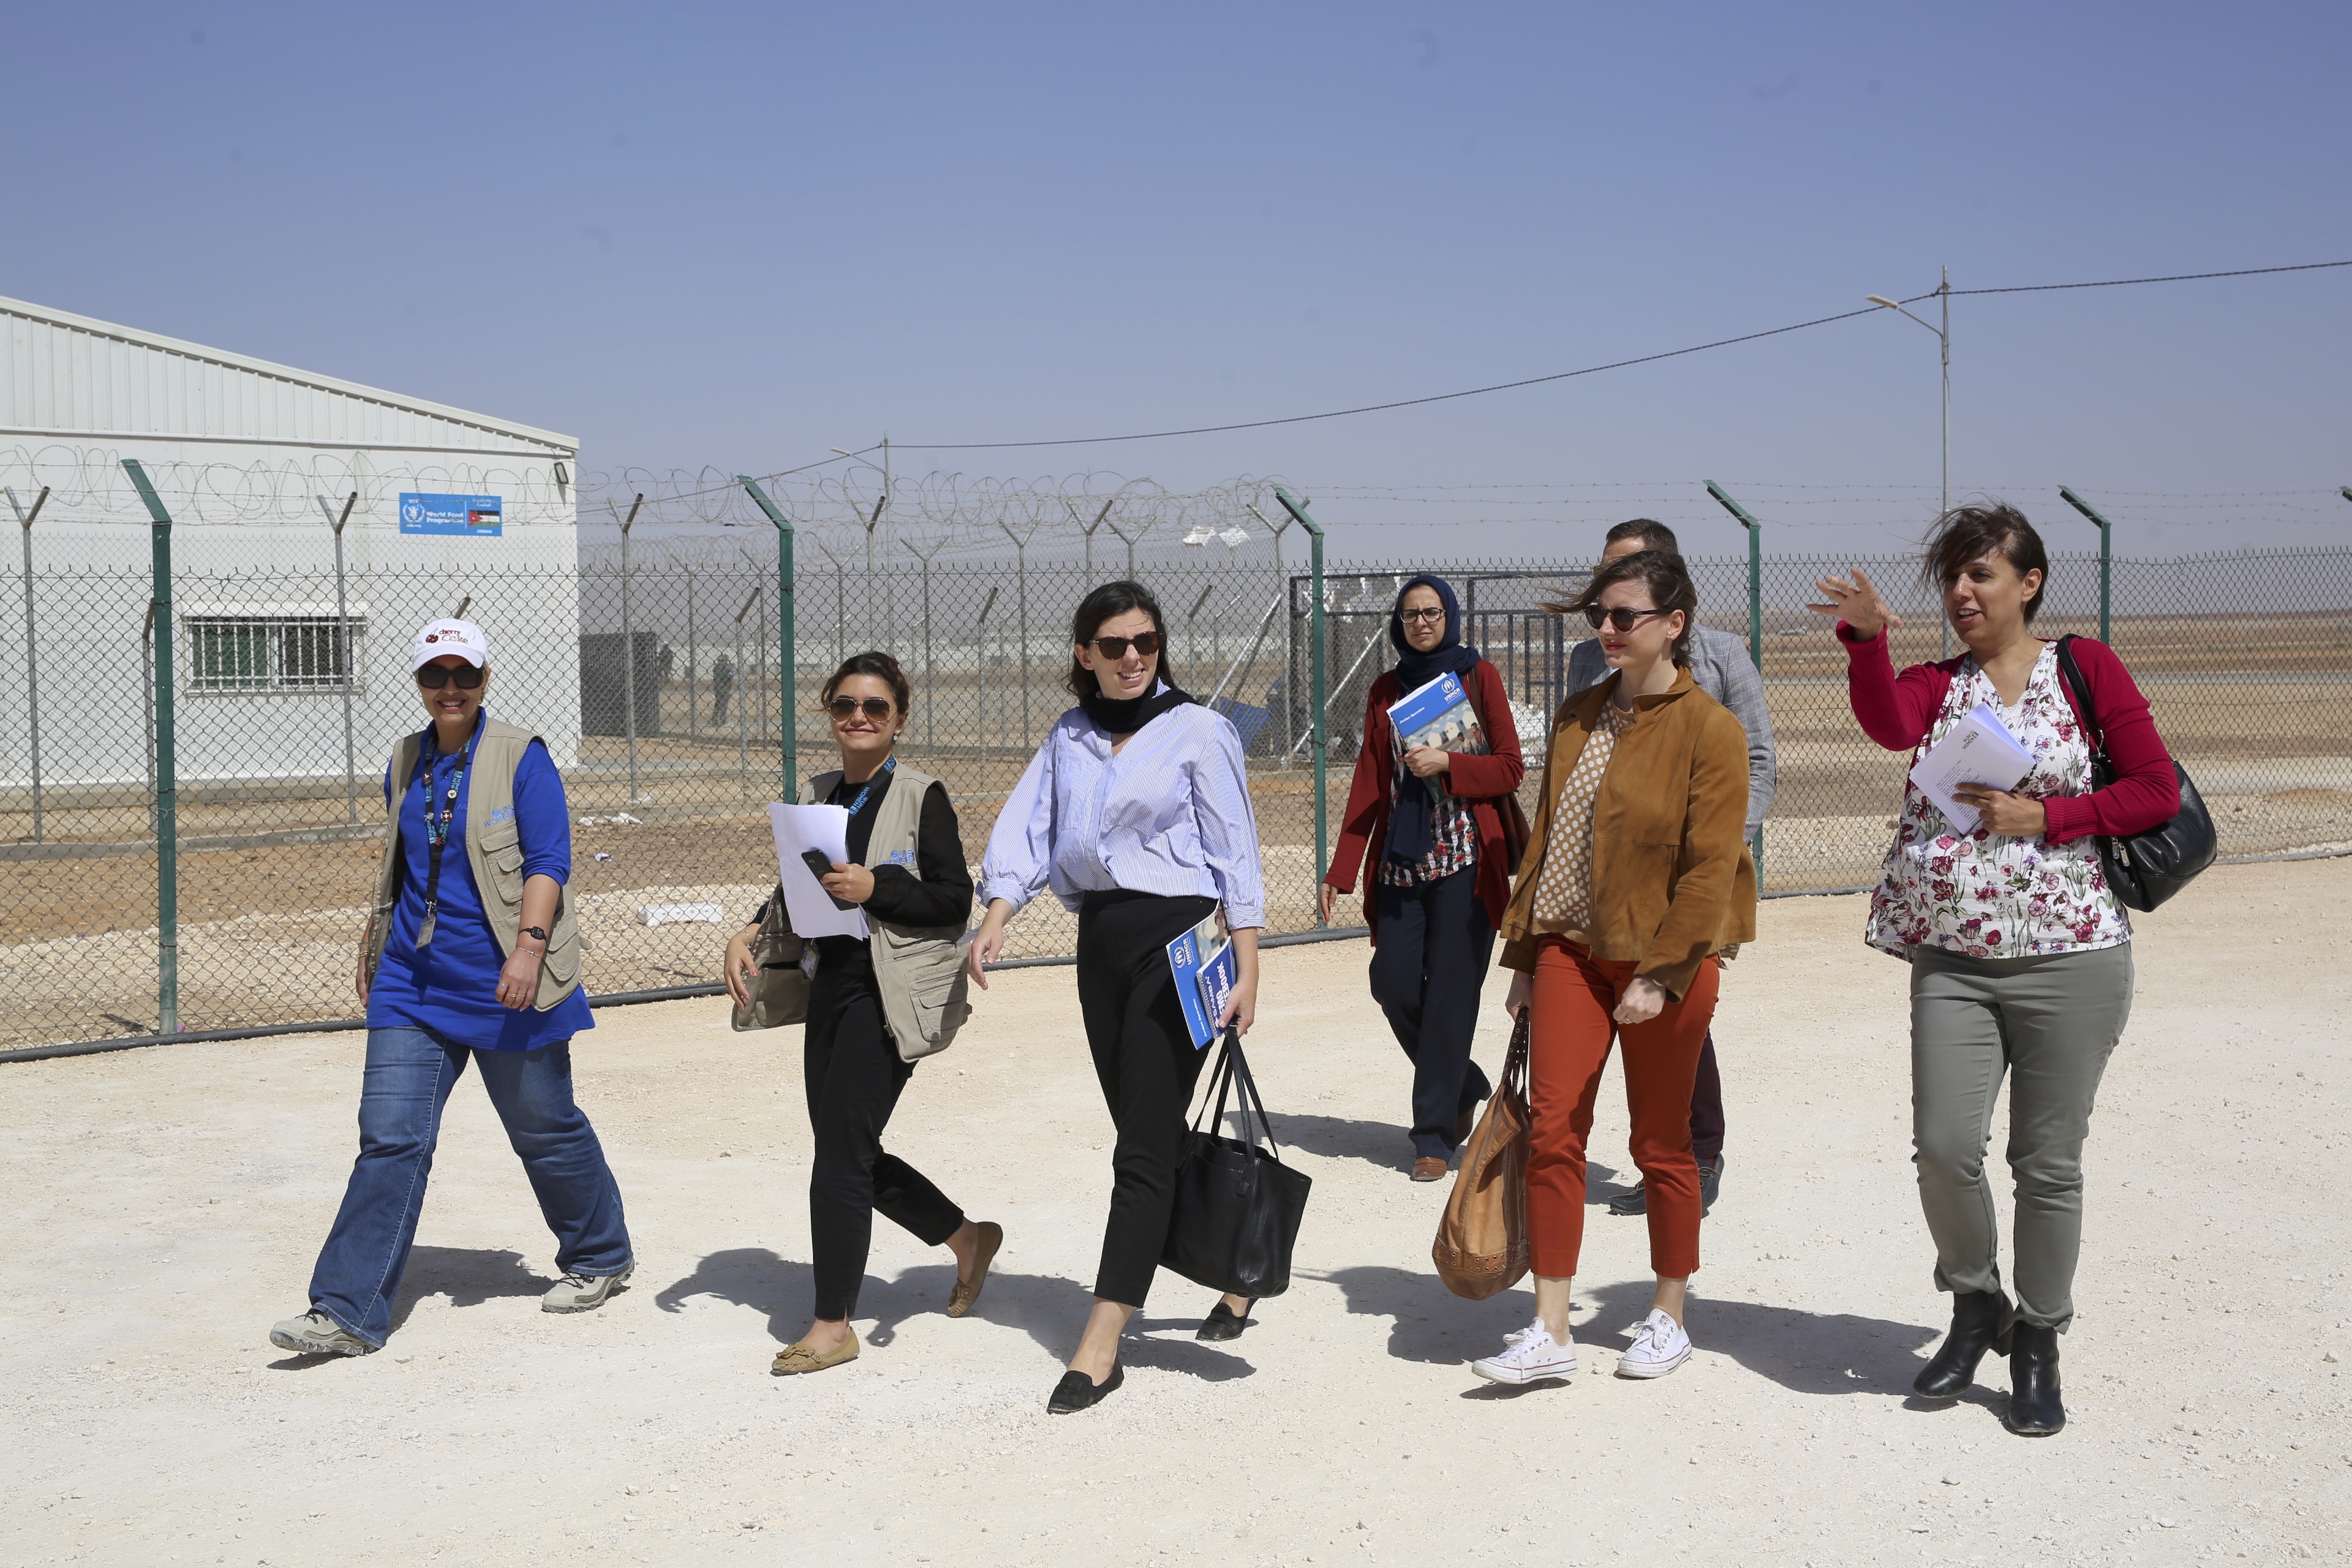 The delegation joins UN Women at the Azraq 'Women and Girls' Oasis' in village 3, the Oasis was inaugurated in February 2018 alongside the French Ambassador of Jordan and fellow members who joined the delegation visit to the Oasis. 